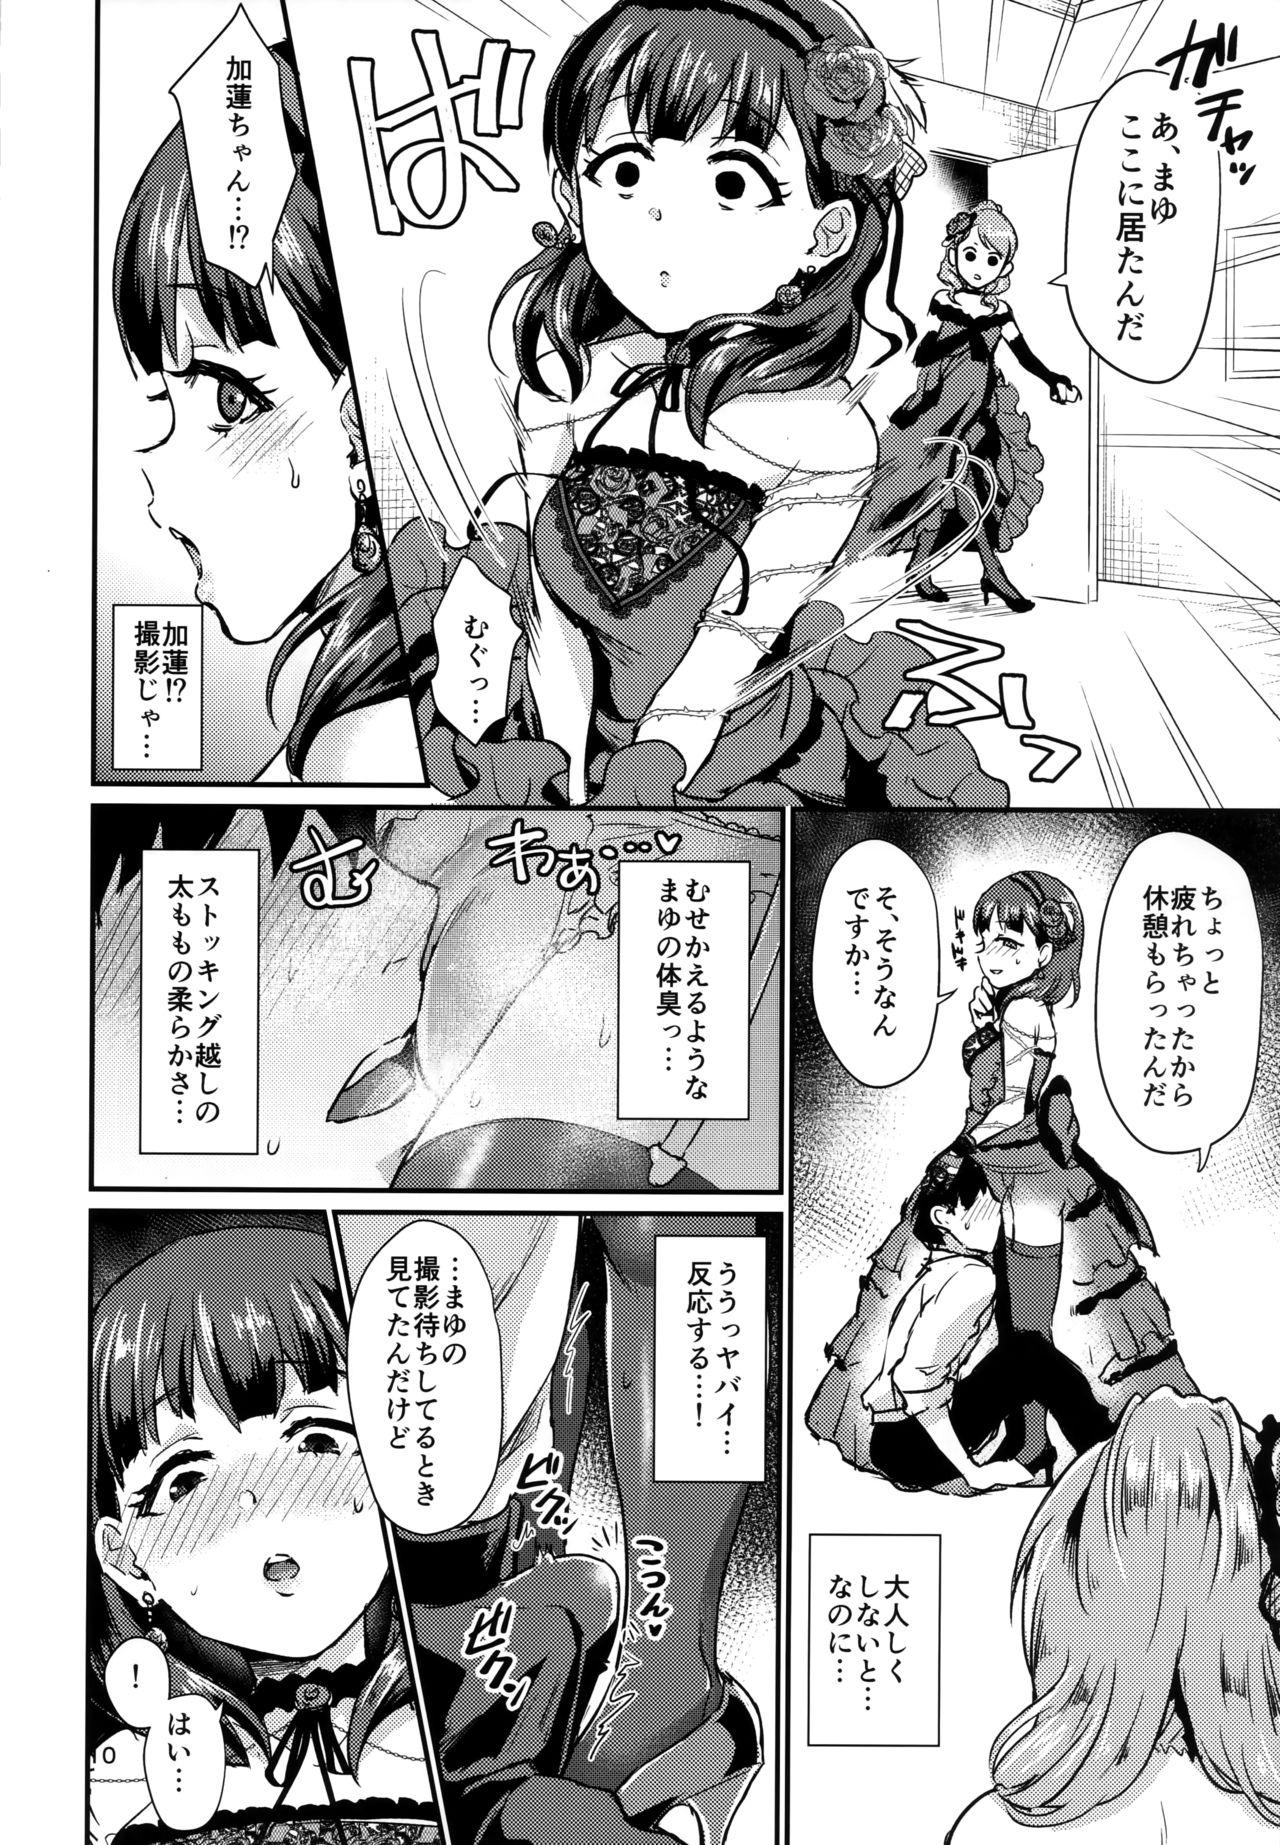 Eurobabe Don't stop my pure love - The idolmaster Girl Girl - Page 9